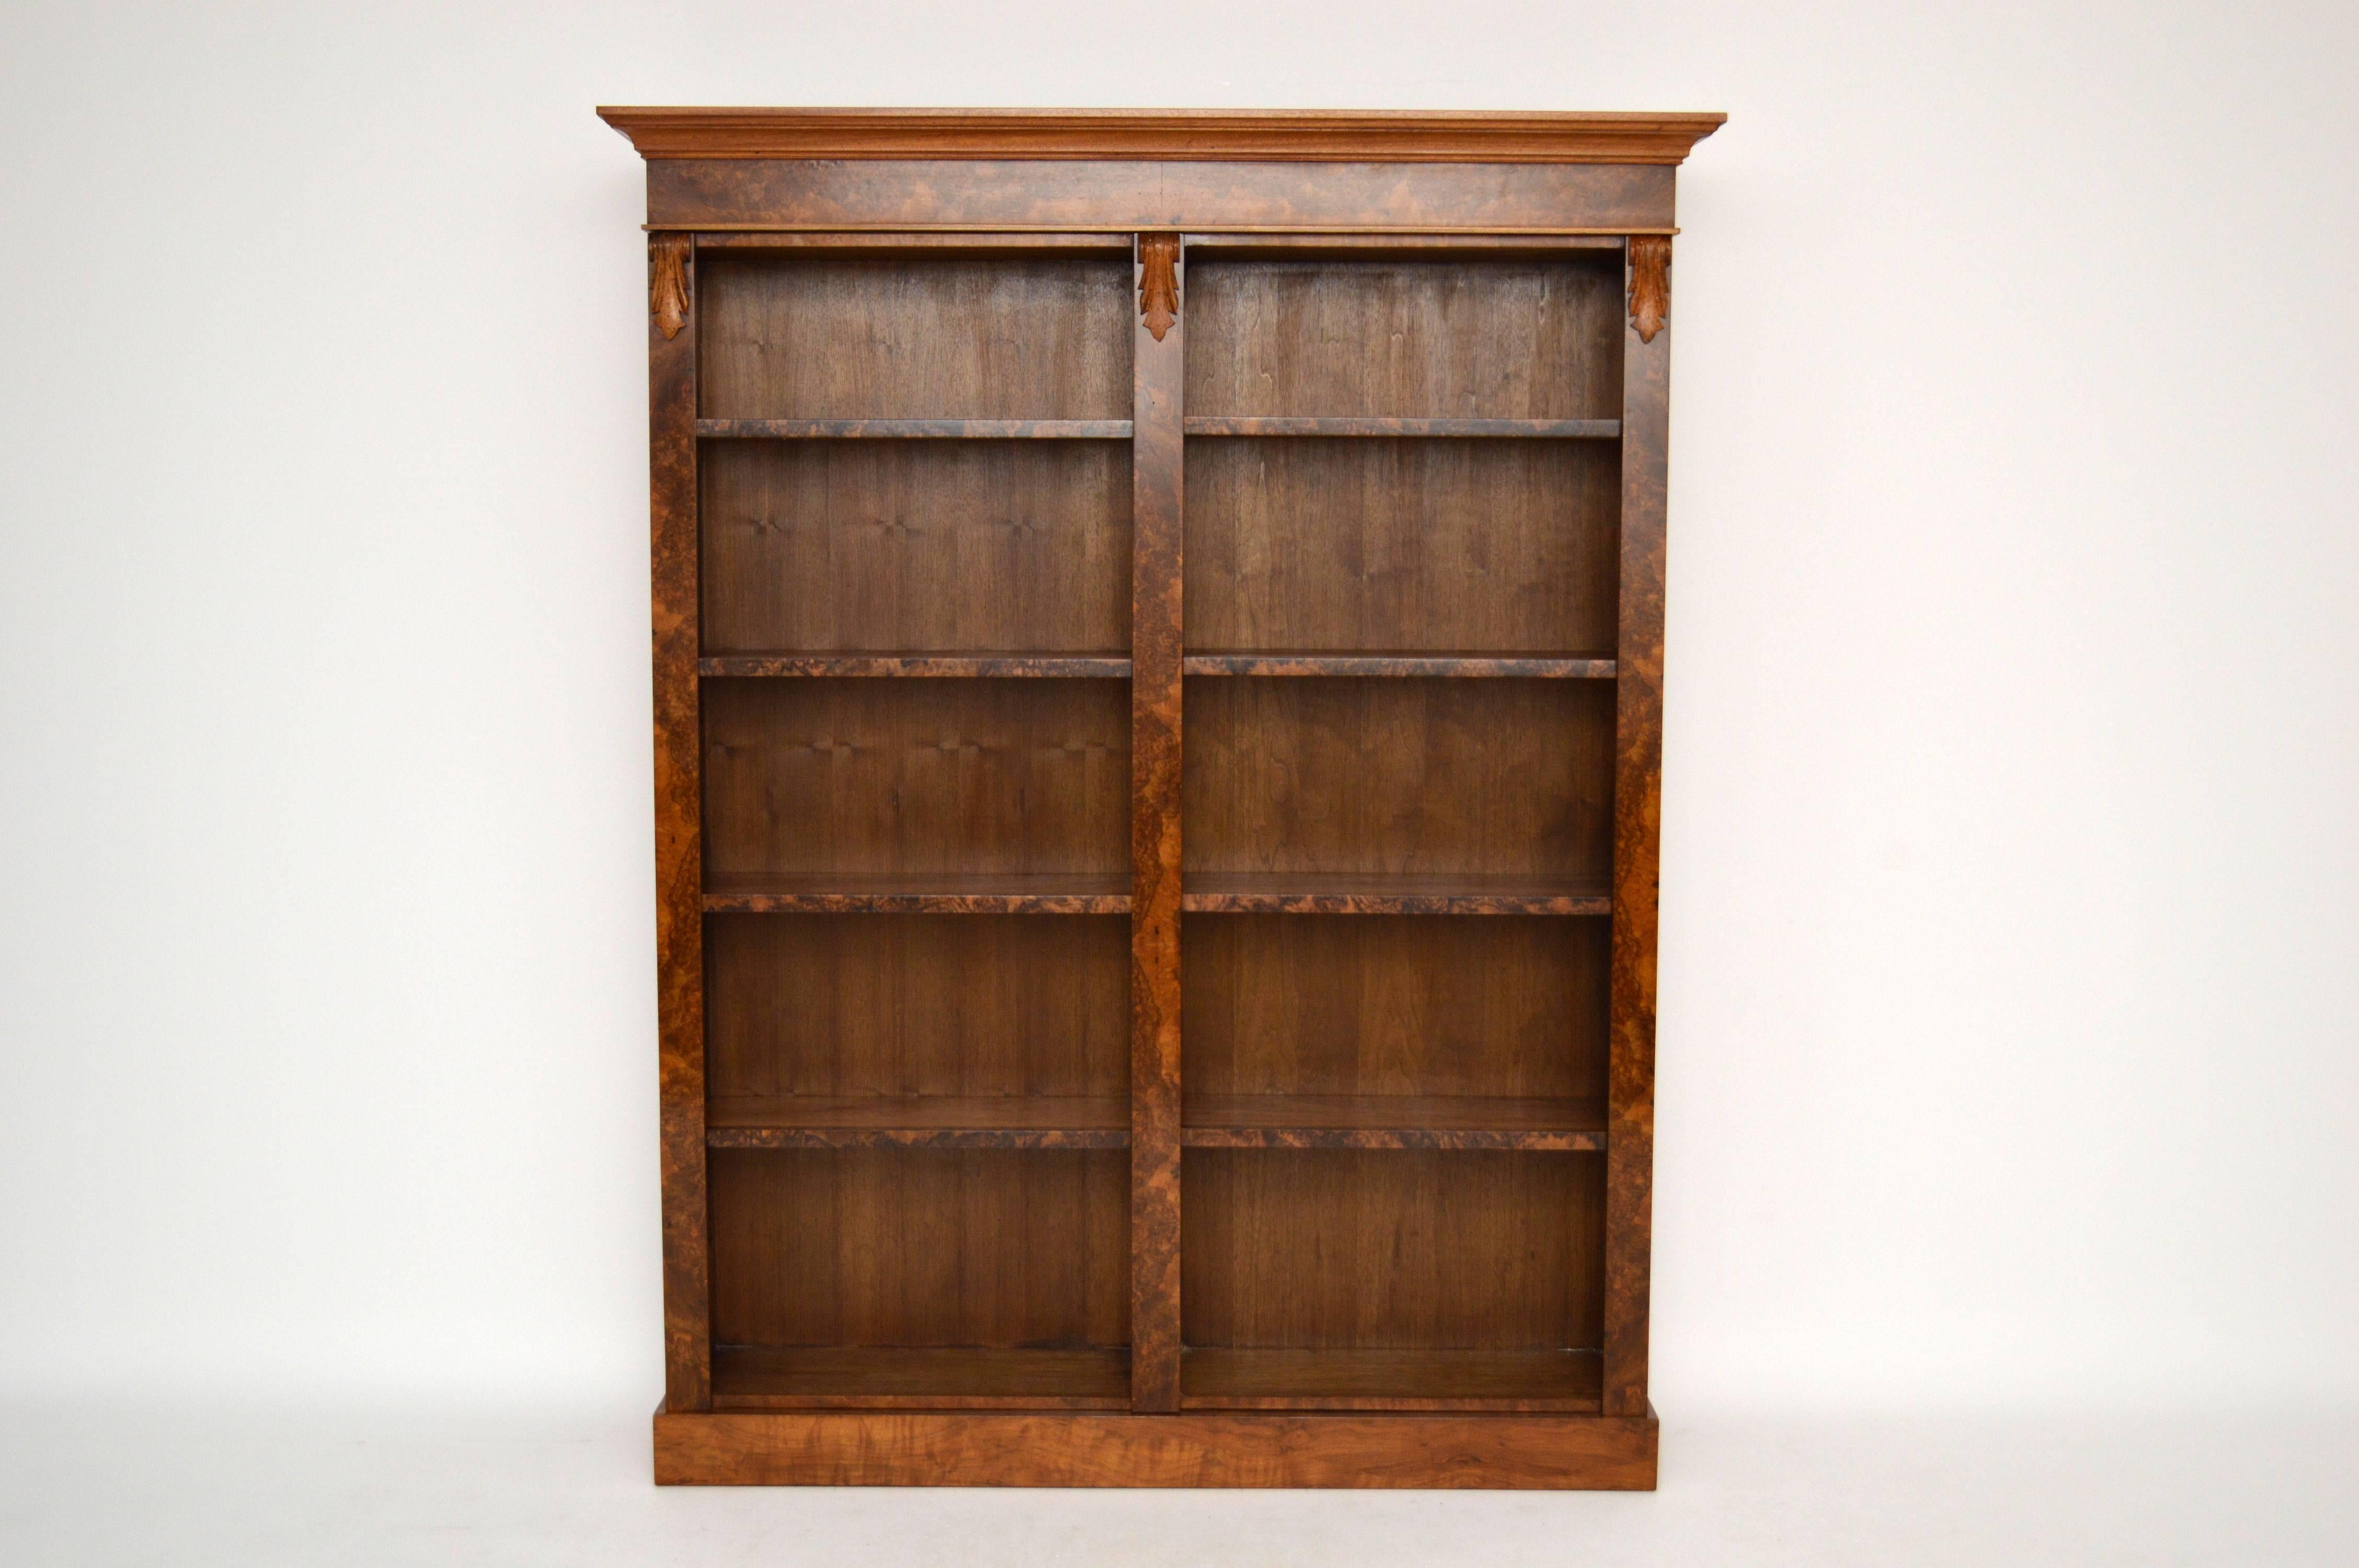 This magnificent large open bookcase has just been constructed by a master craftsman. He has used top quality European burr walnut veneers on the front and figured walnut on the sides and insides. As you probably know, we have made many of these in